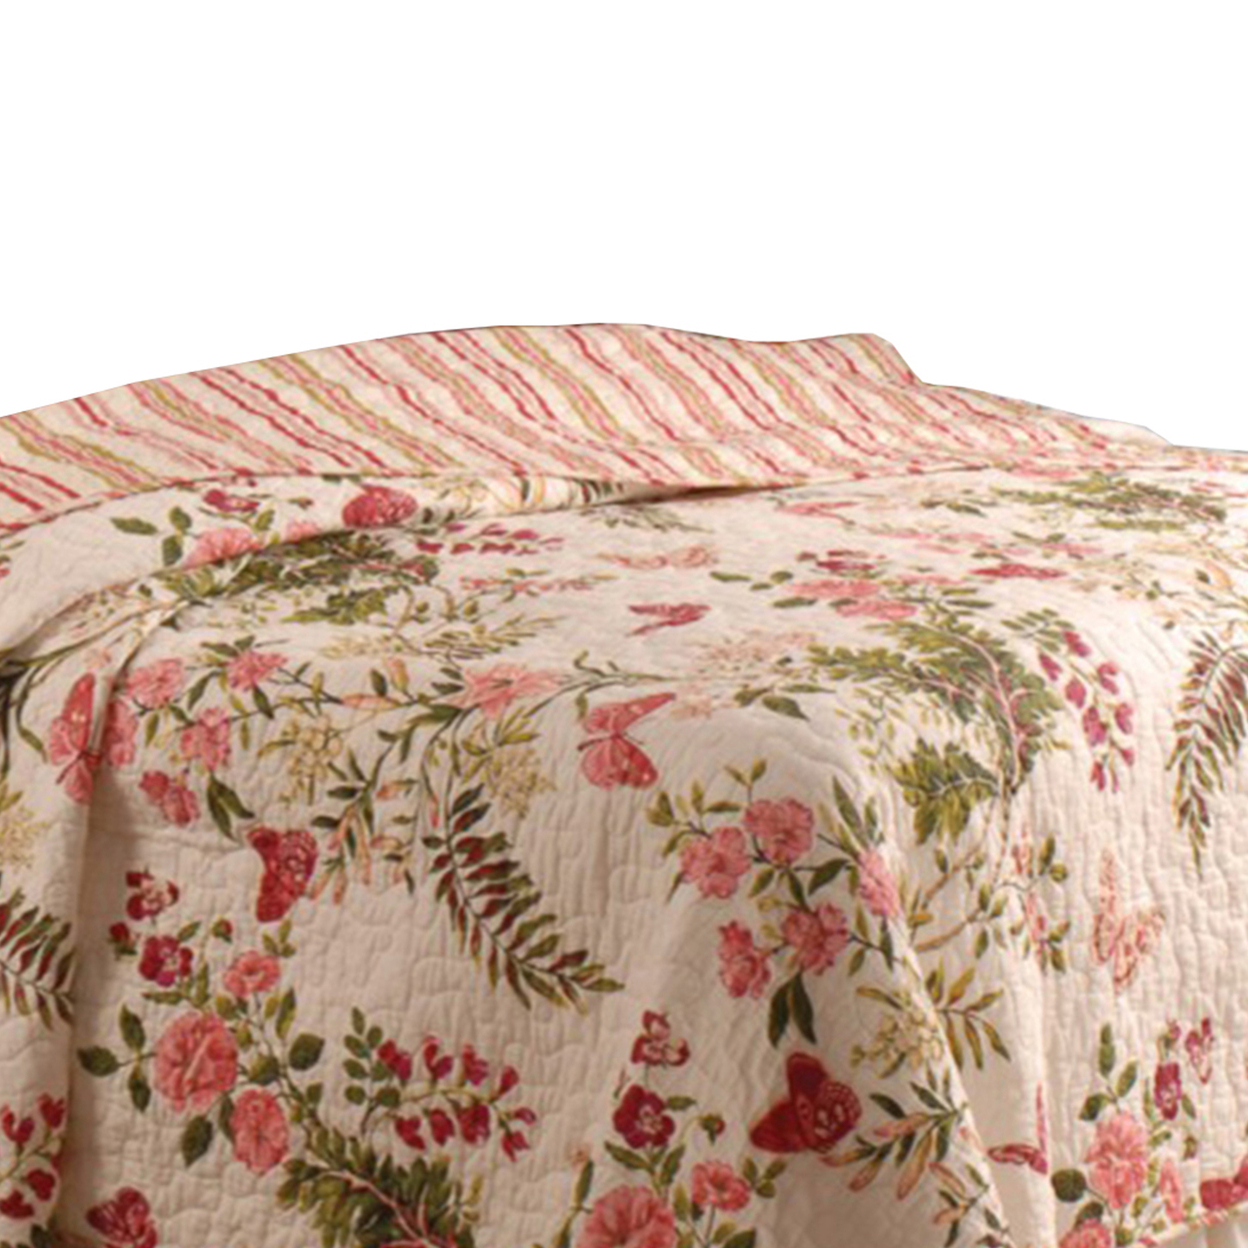 Atlanta Fabric 2 Piece Twin Size Quilt Set With Butterfly Prints,Multicolor- Saltoro Sherpi